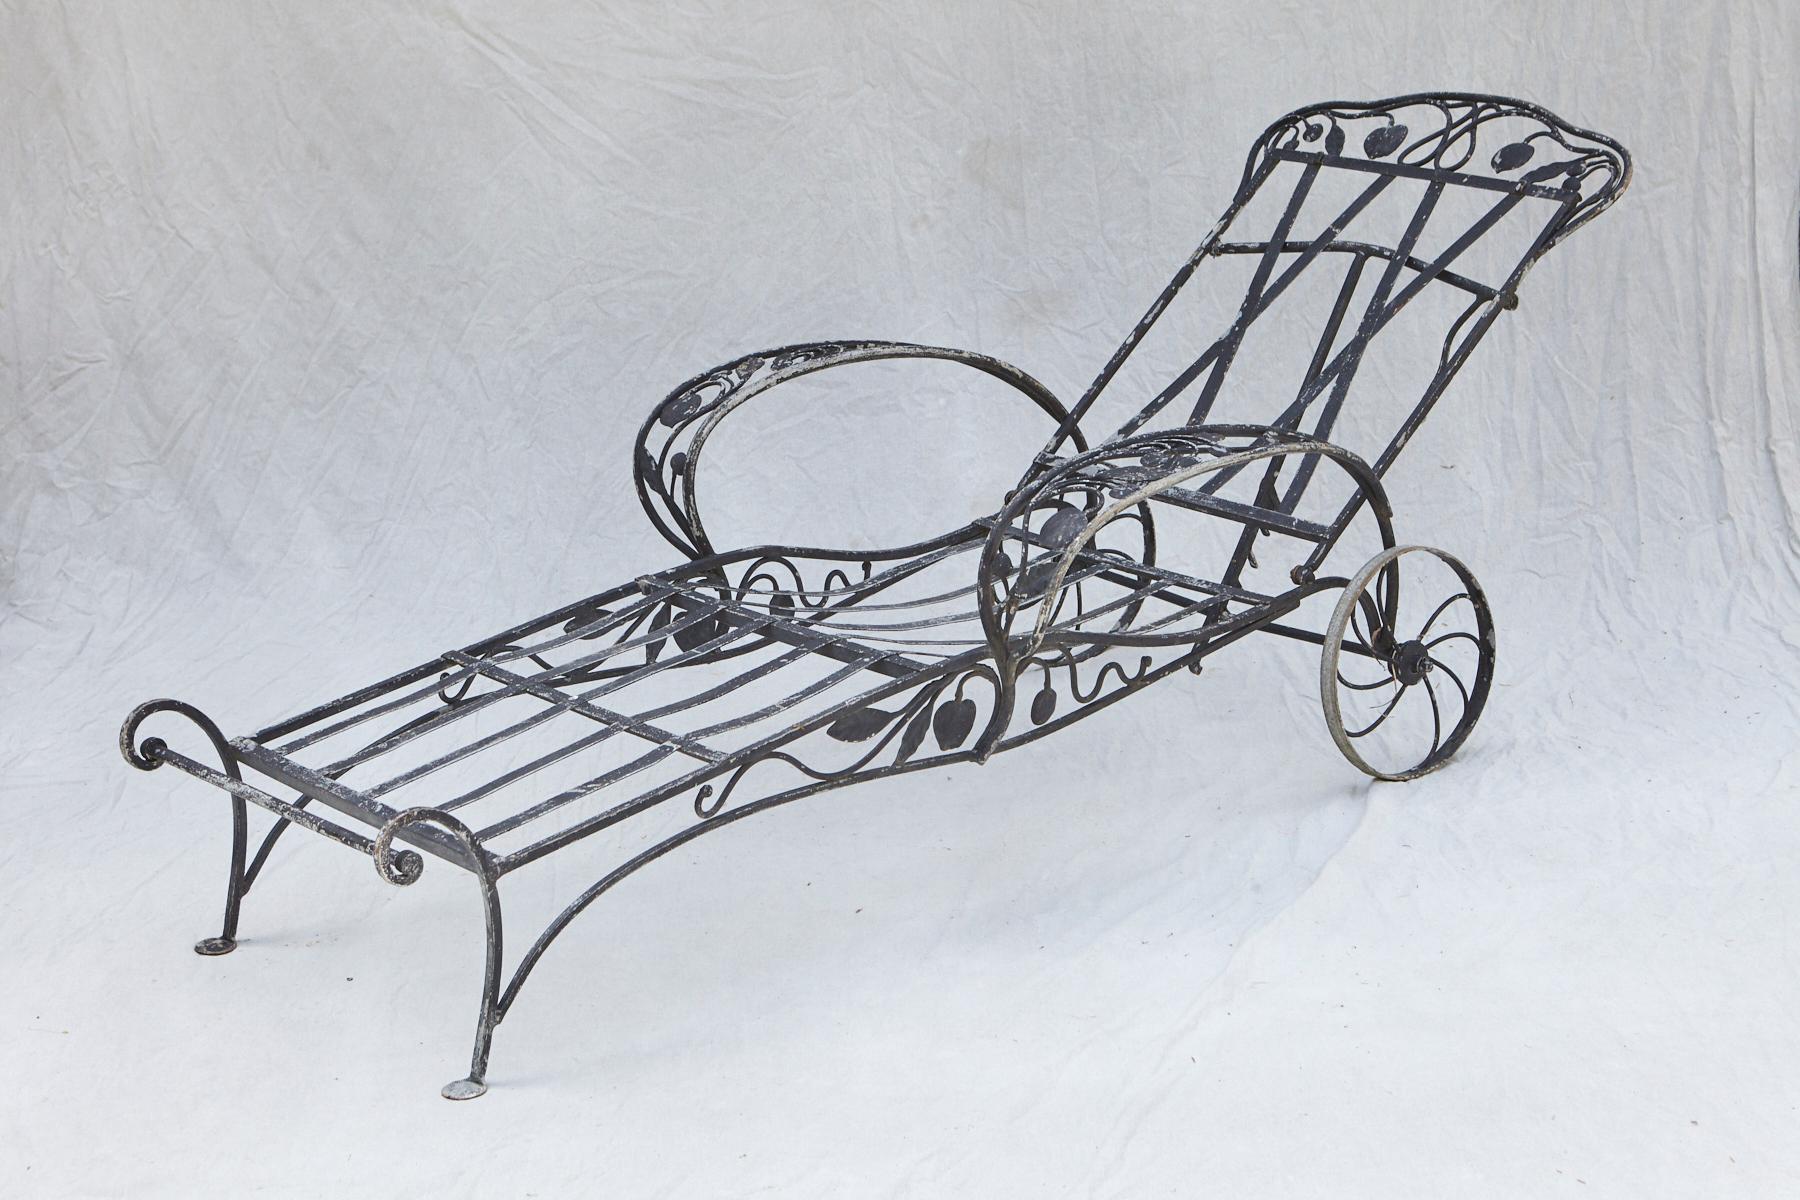 A rare Salterini elaborate wrought-iron lounge chair with wheels from his Della Robbia Collection / Group from the 1940s.
The lounge chair is in a very good condition, solid and sturdy, part of the Neva-Rust outdoor product range of Salterin's